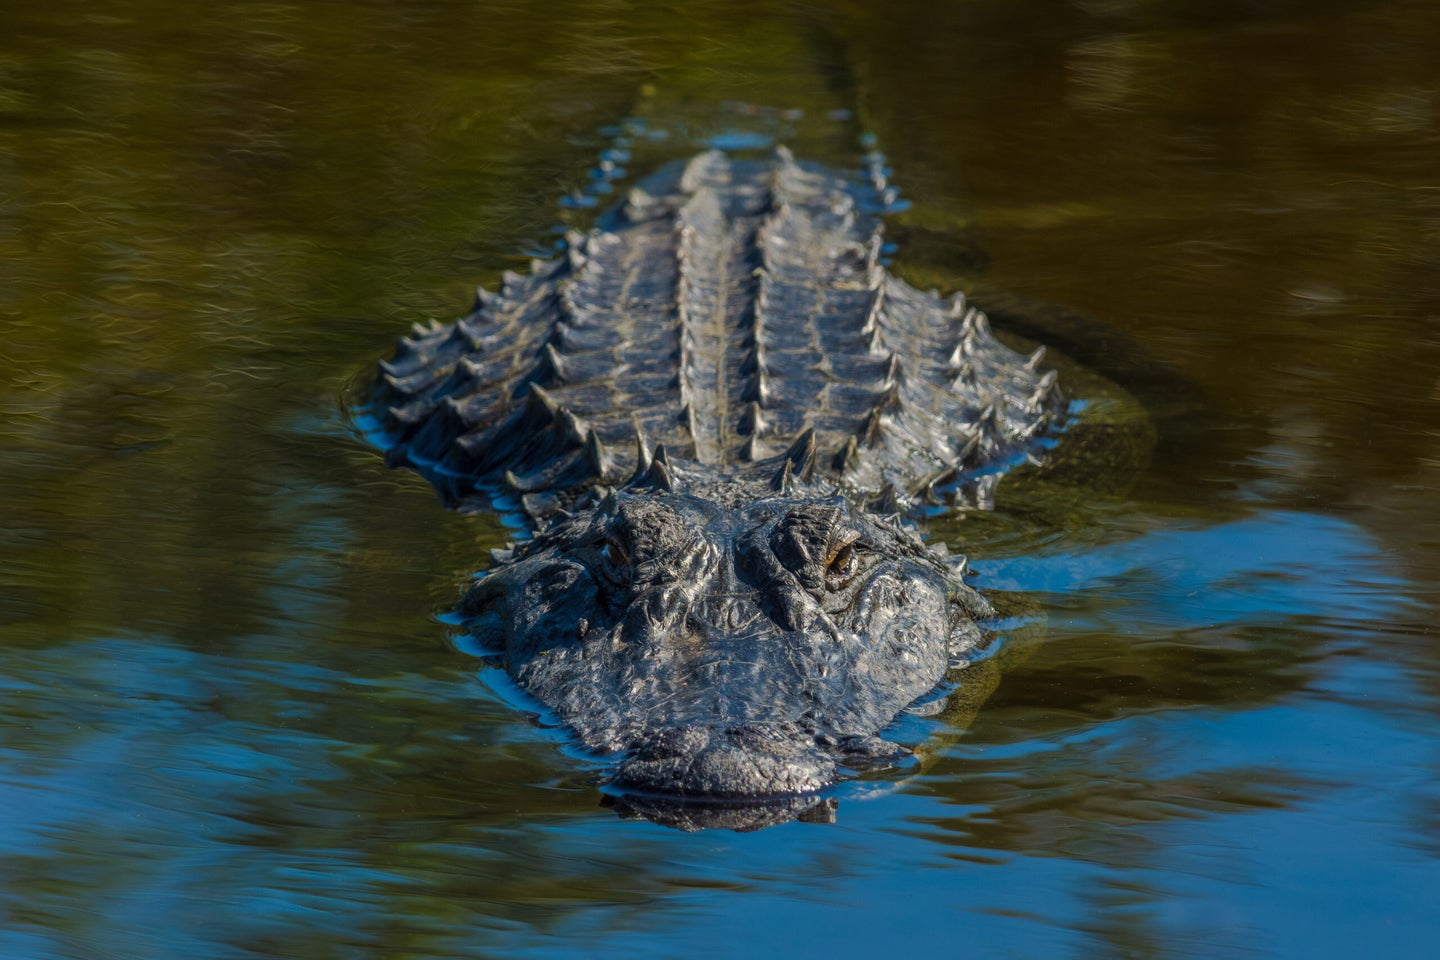 Alligator in water close and upfront